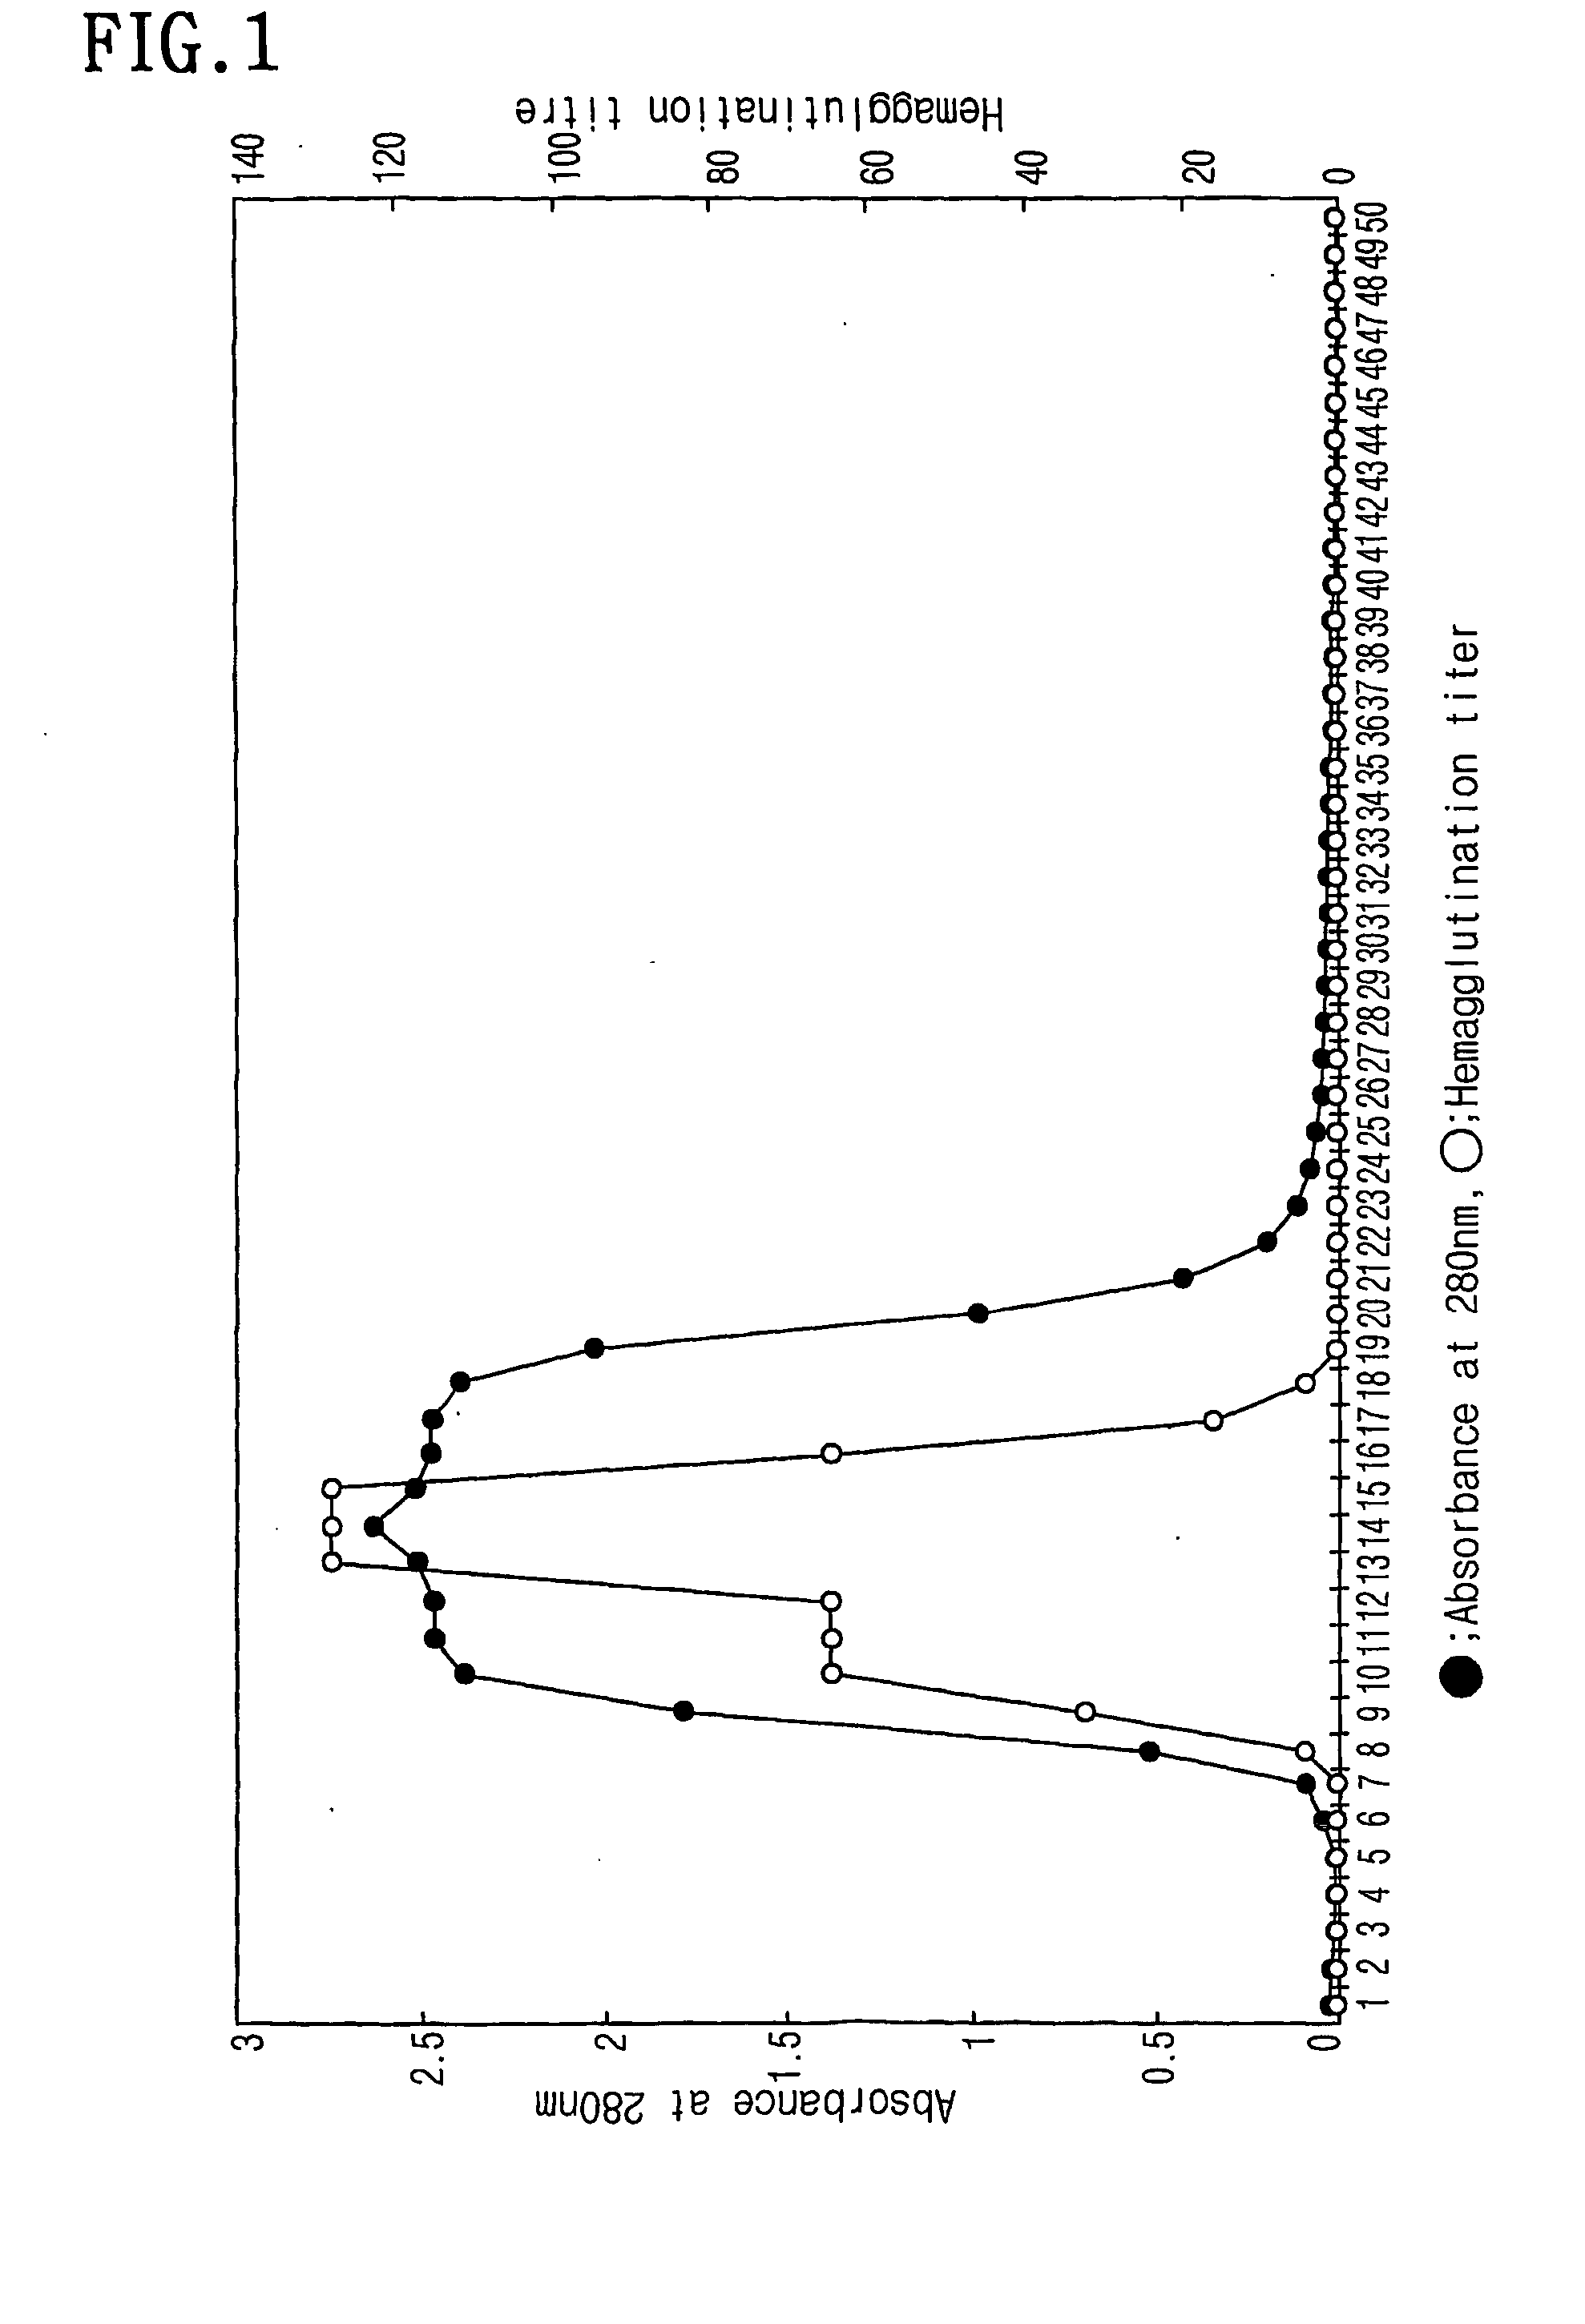 Lectin protein prepared from maackia fauriei, process for preparing the same and the use thereof